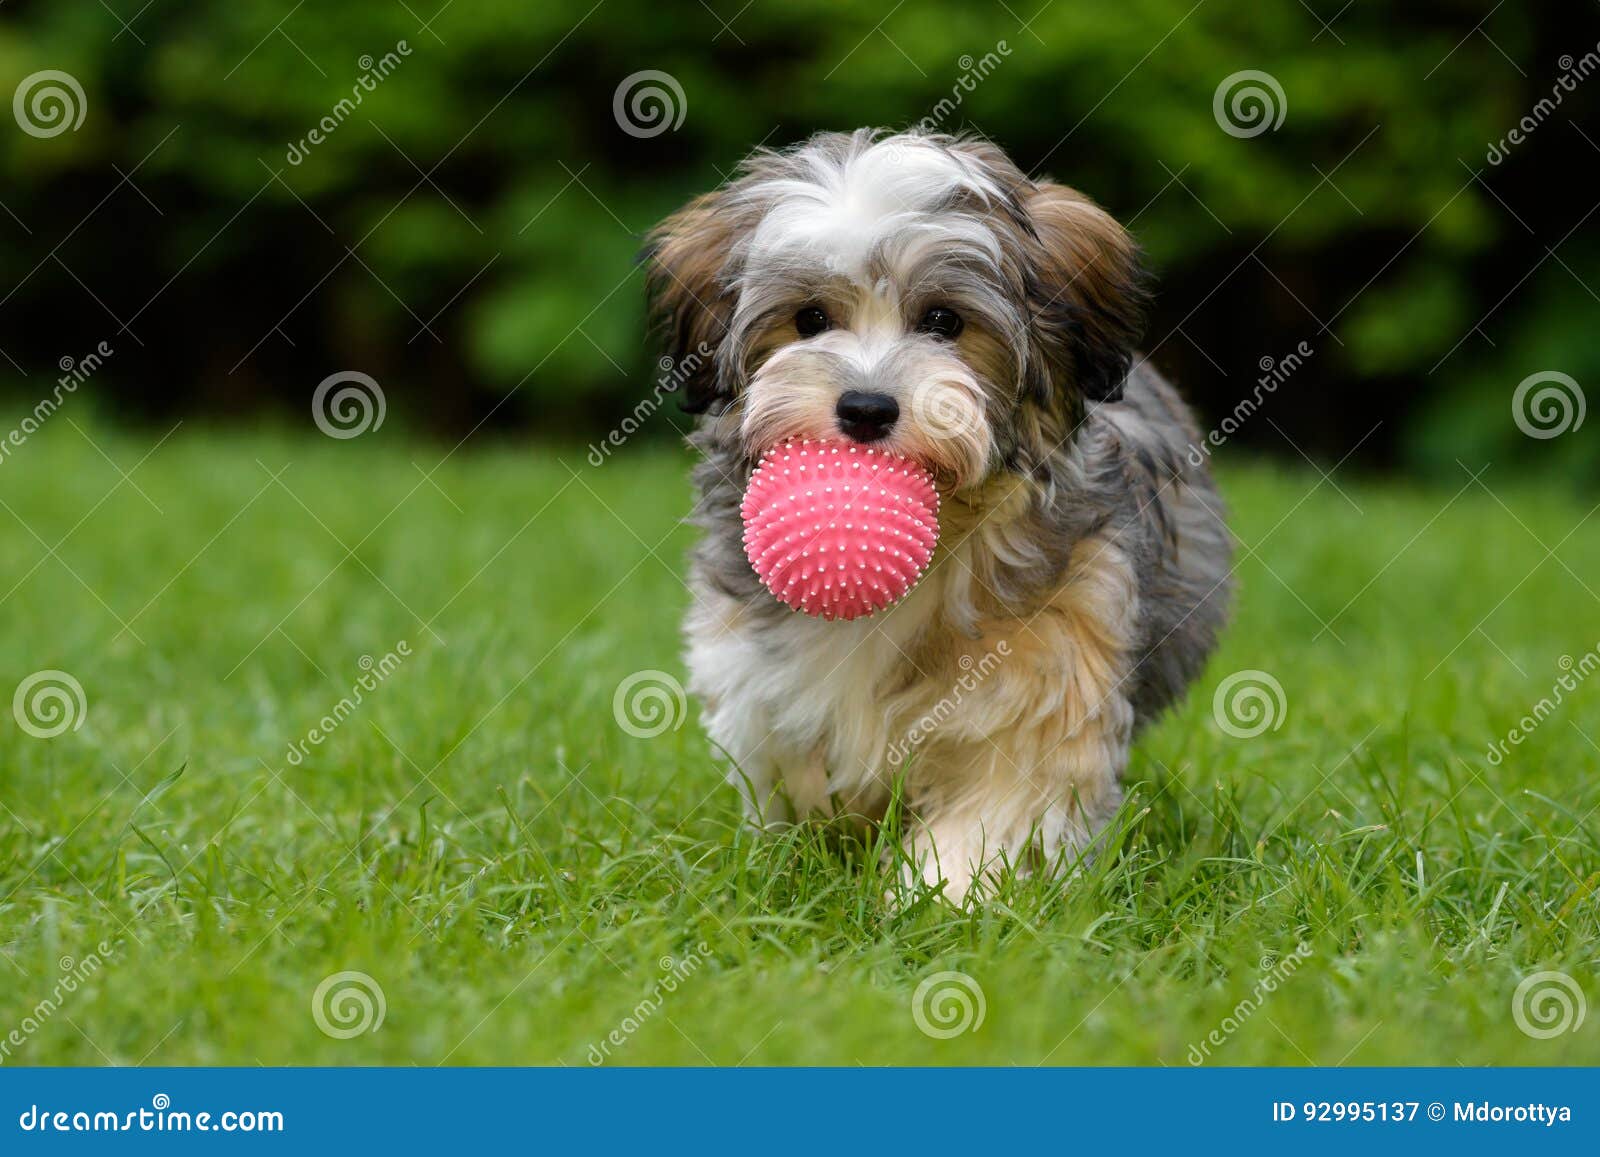 playful havanese puppy brings a pink ball in the grass